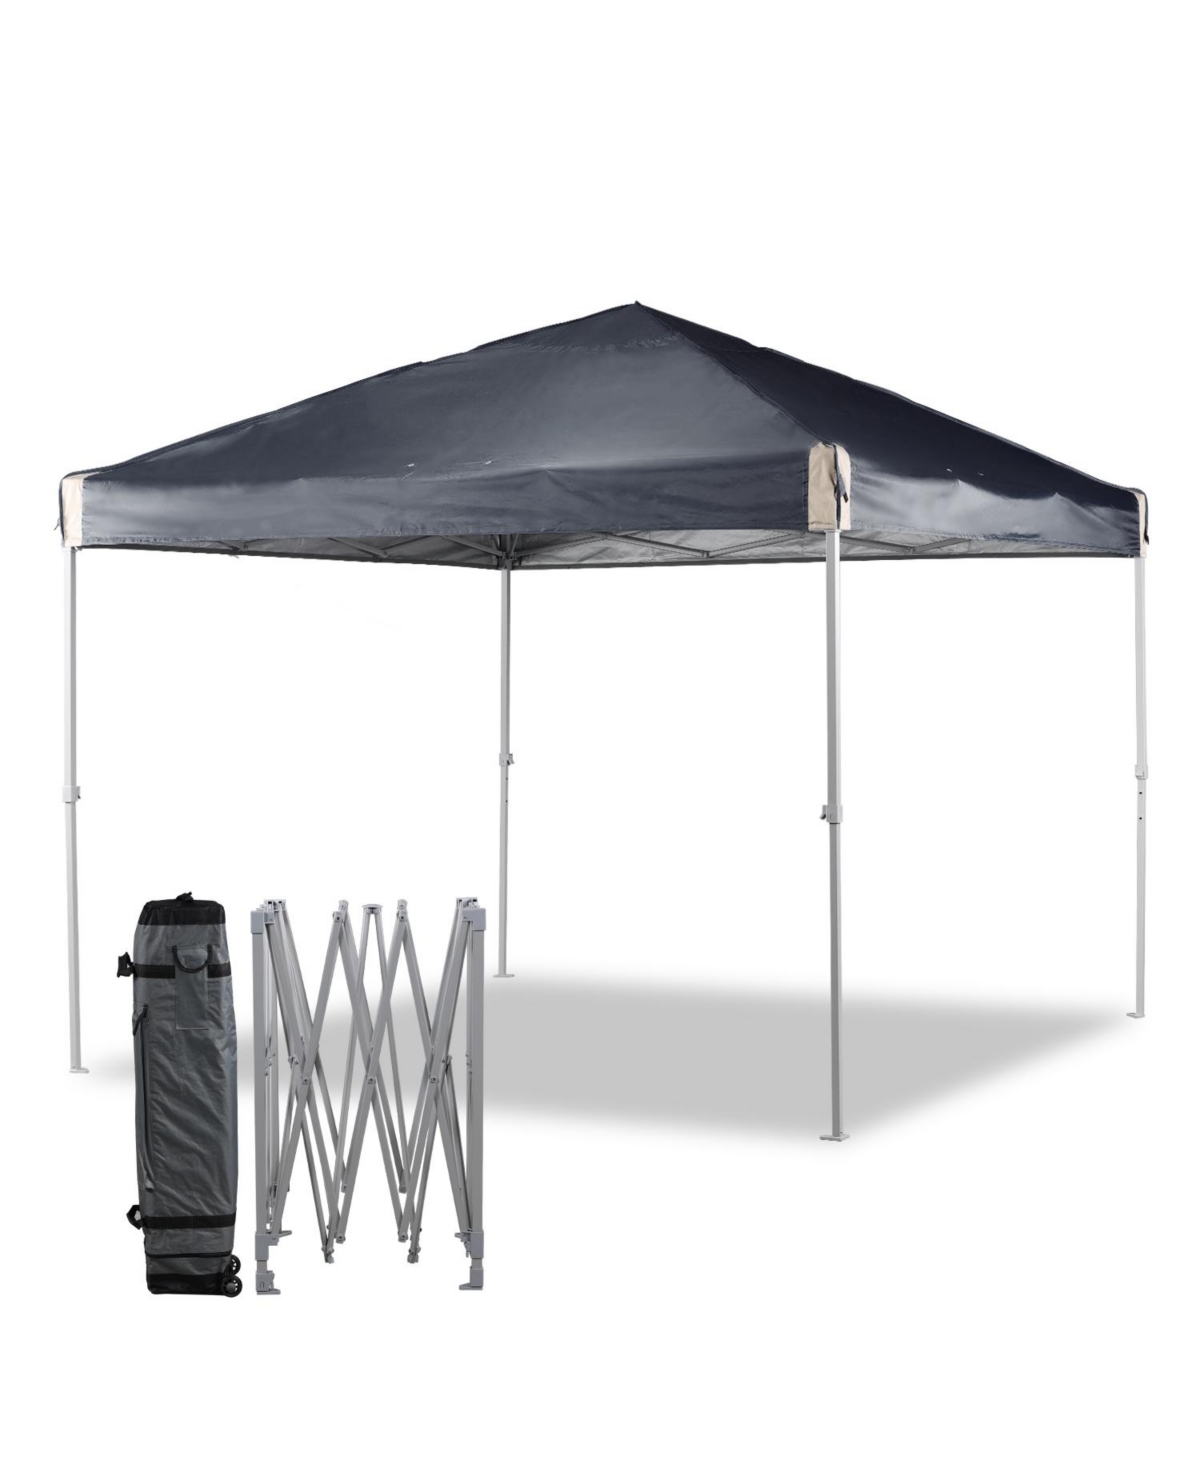 Pop Up Canopy Tent with Roller Bag, Portable Instant Shade Canopy - Black